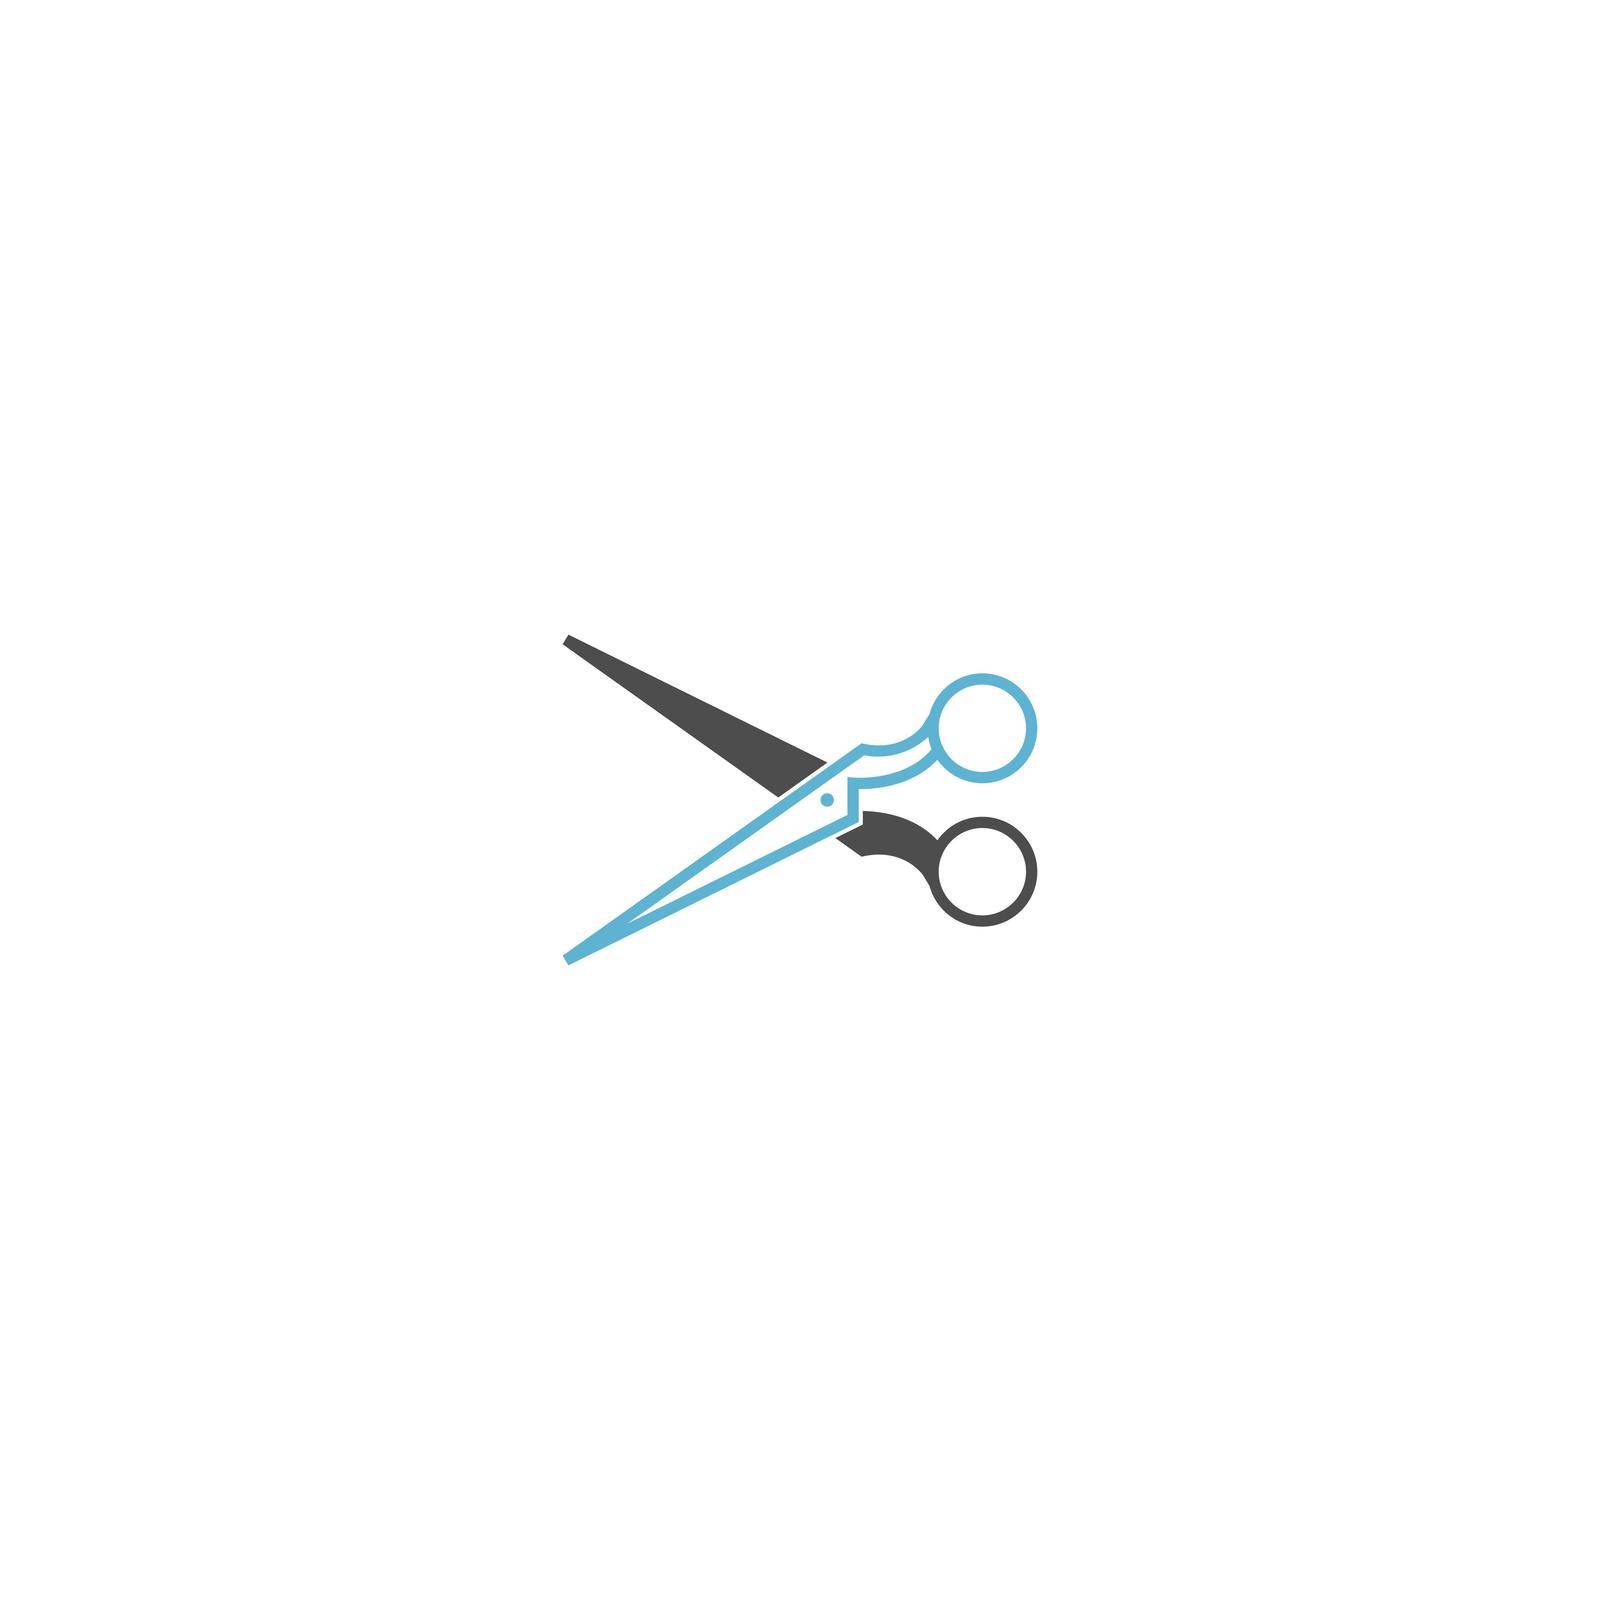 Scissor icon ilustration template by bellaxbudhong3